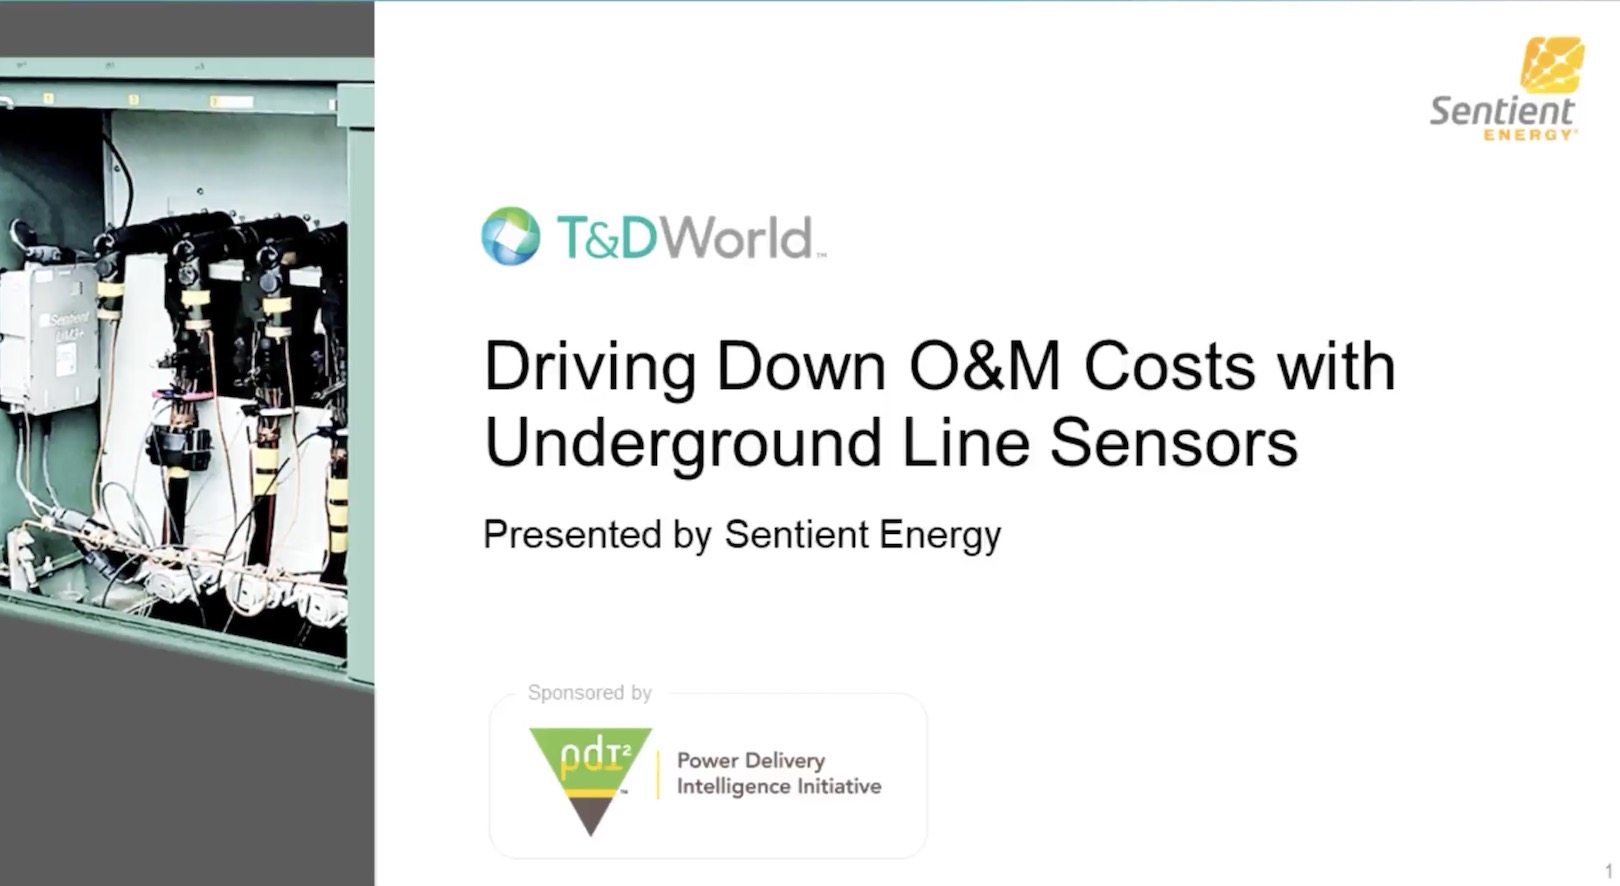 Driving Down O&M Costs - Underground Line Sensors